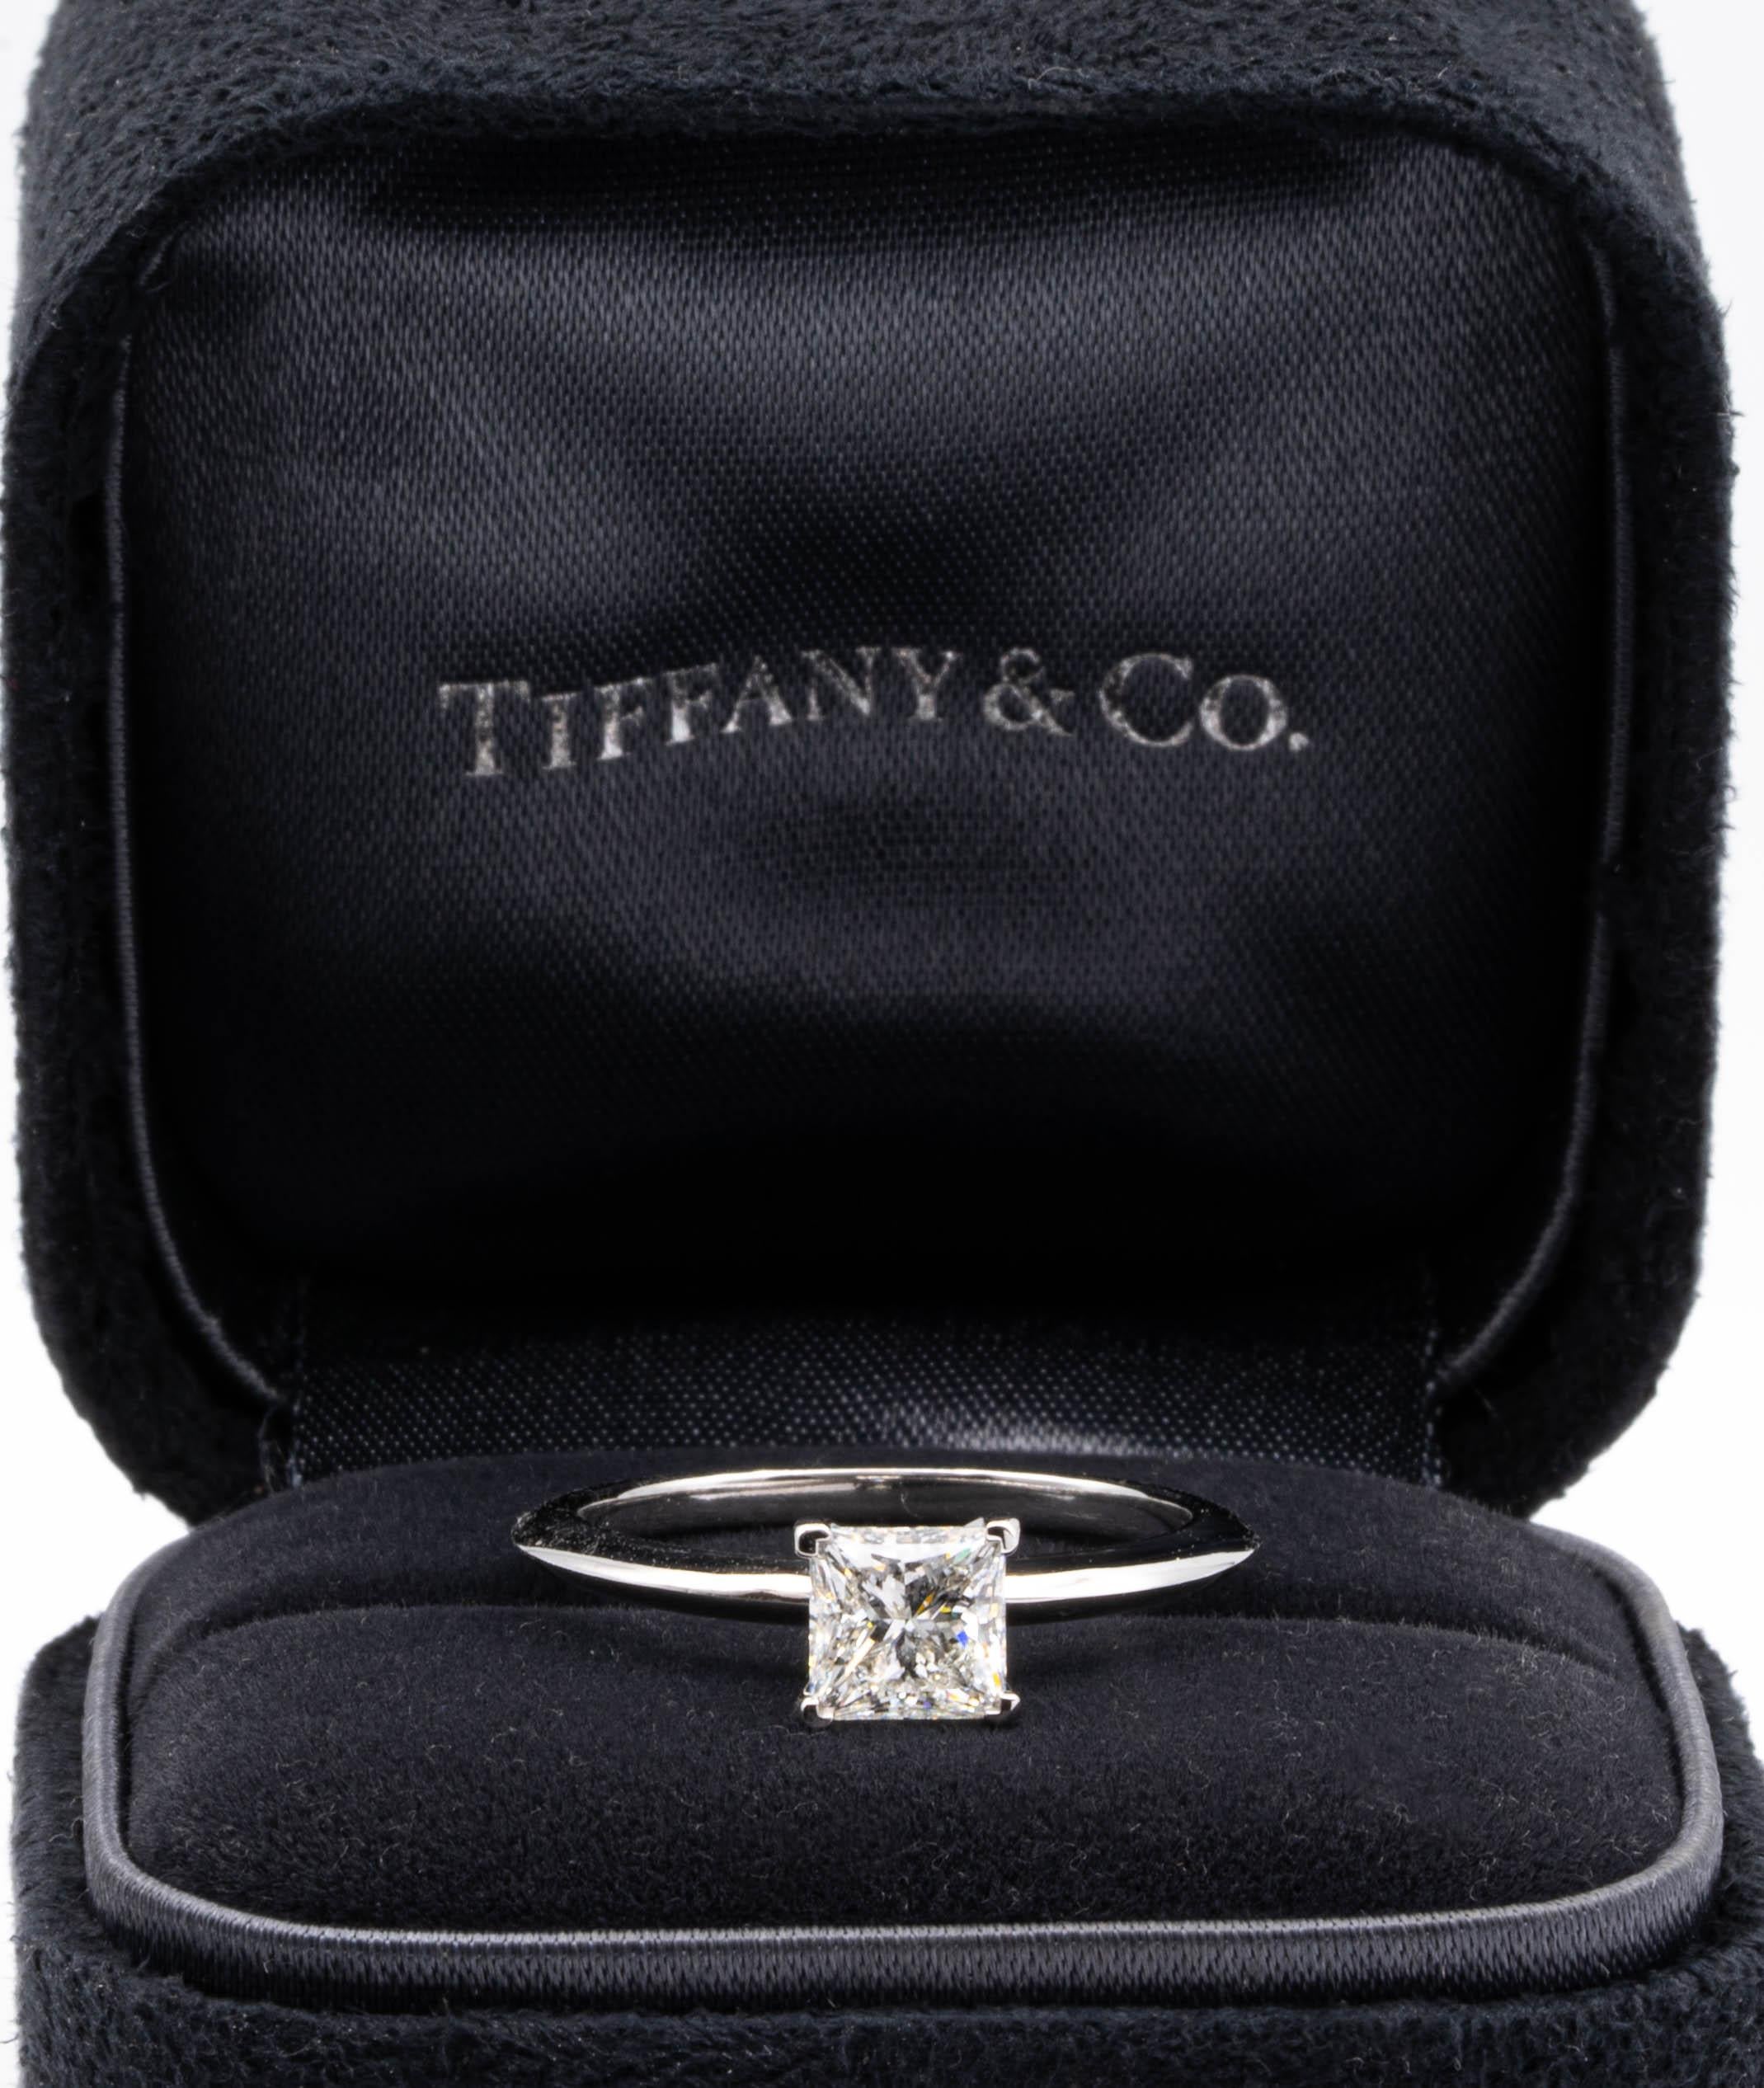 Classic Diamond Engagement Solitaire ring signed by Tiffany & Co. featuring a 4 prong set 0.93 ct Center Princess cut diamond in platinum. Graded by Tiffany I color , and VVS1 Clarity. 
Includes Original Tiffany Certificate and Box 
Current Retail